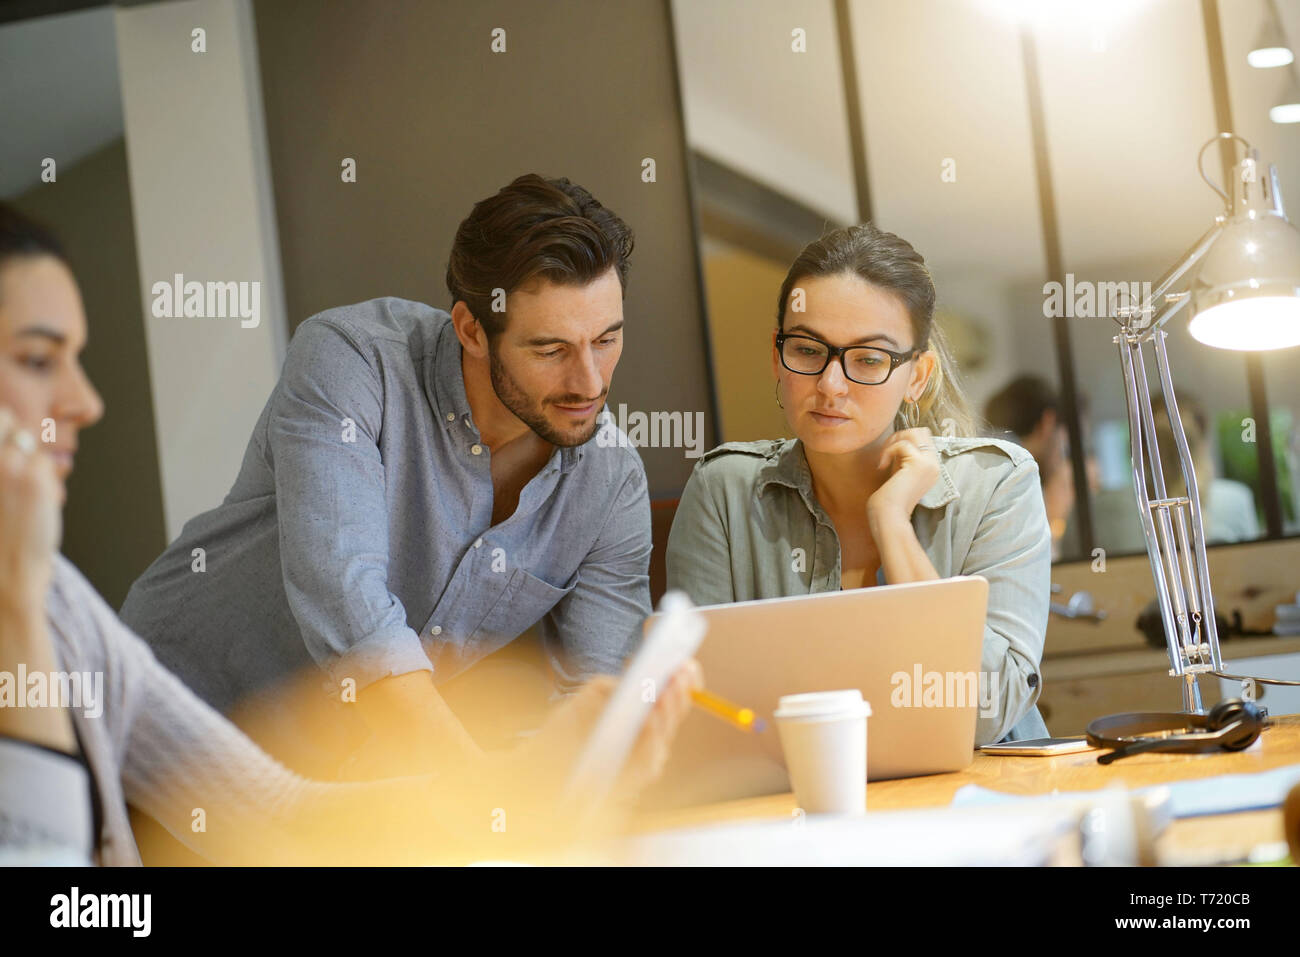 Colleagues looking over ideas in co working space Stock Photo - Alamy